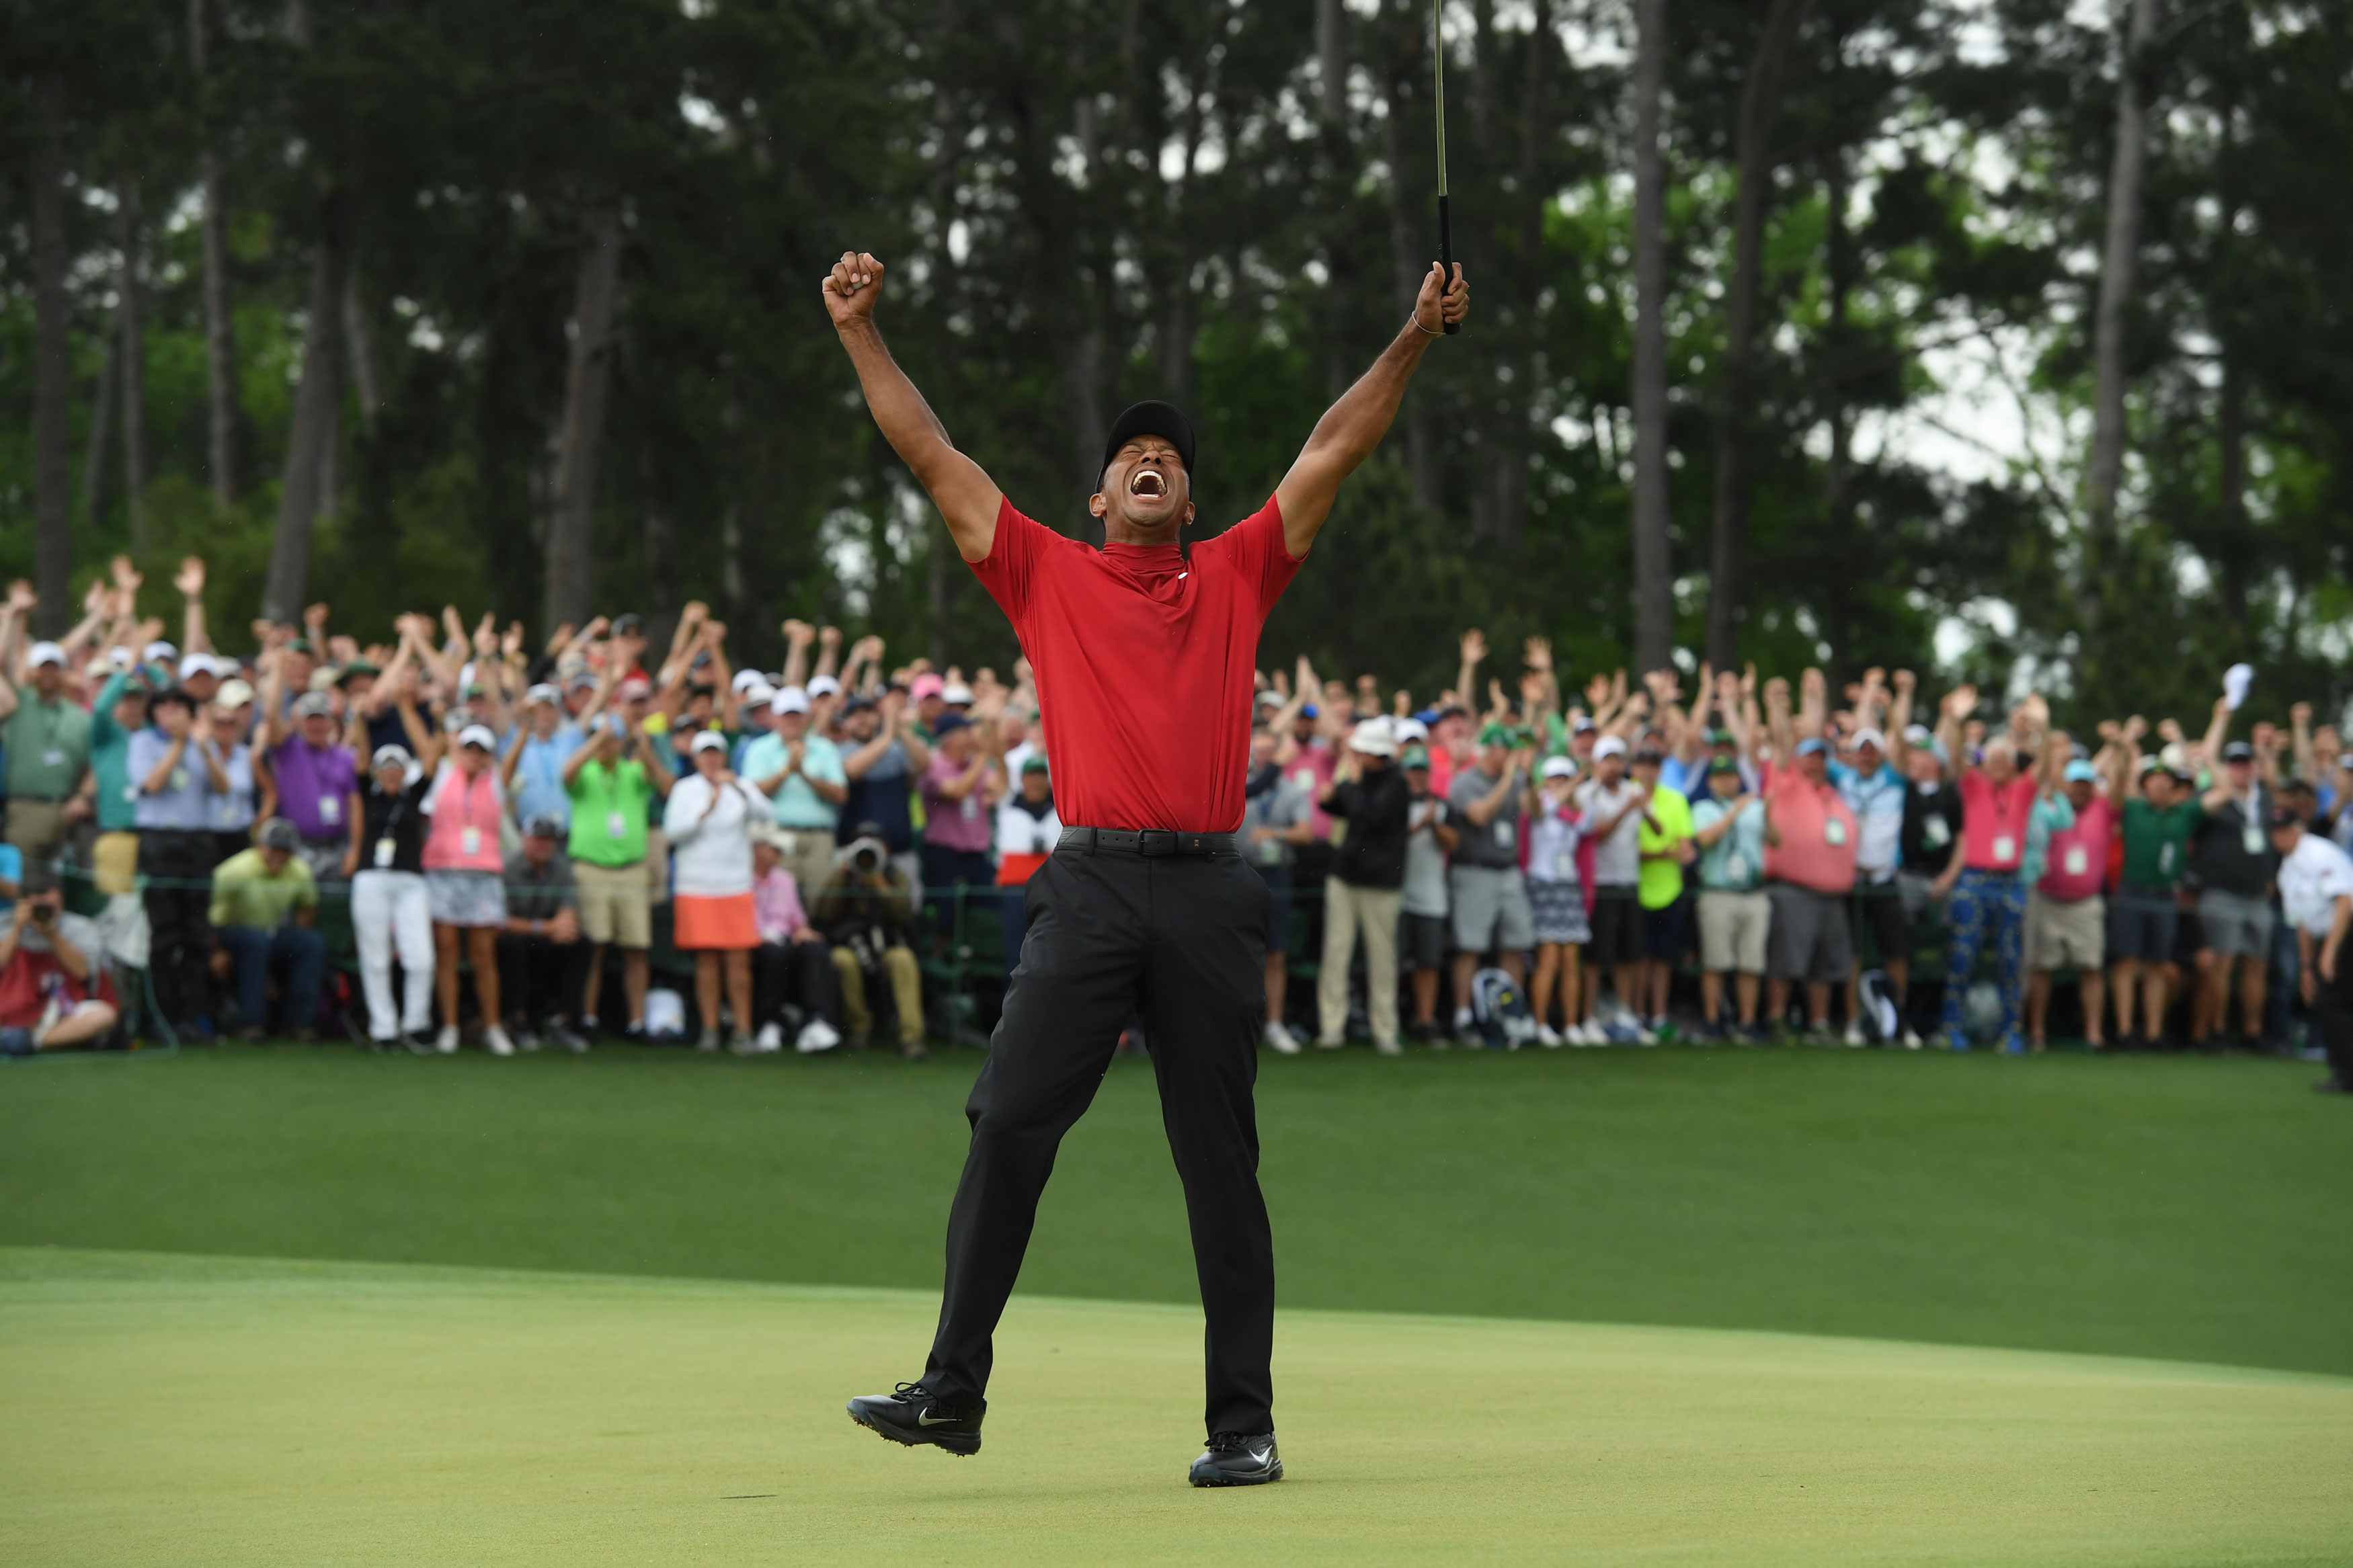 In which year did Tiger Woods complete the 'Tiger Slam' by winning all four major championships in a row?